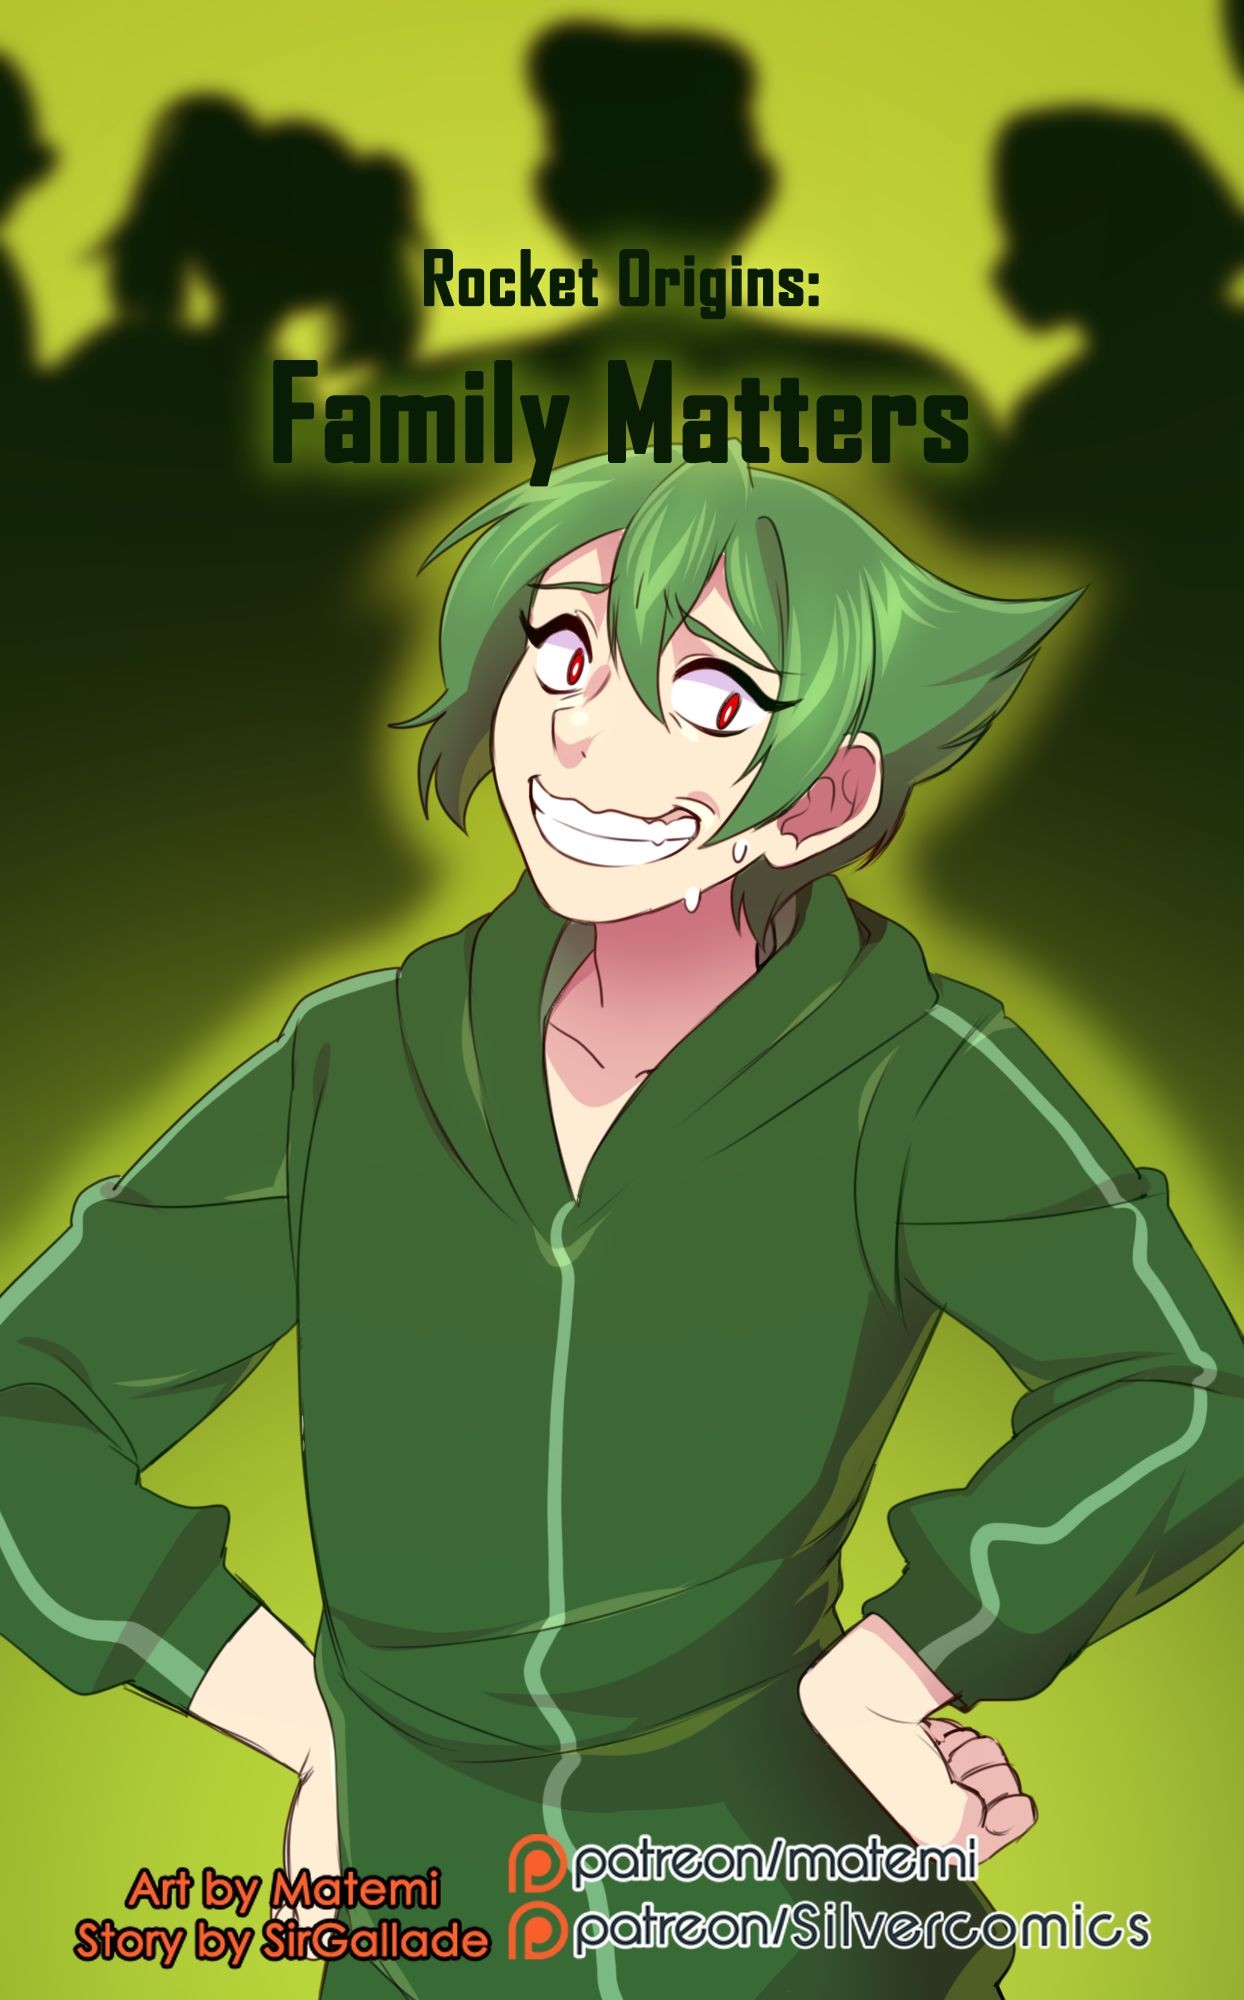 Brother [Matemi] Rocket Origins - Family Matters (Ongoing) Amante